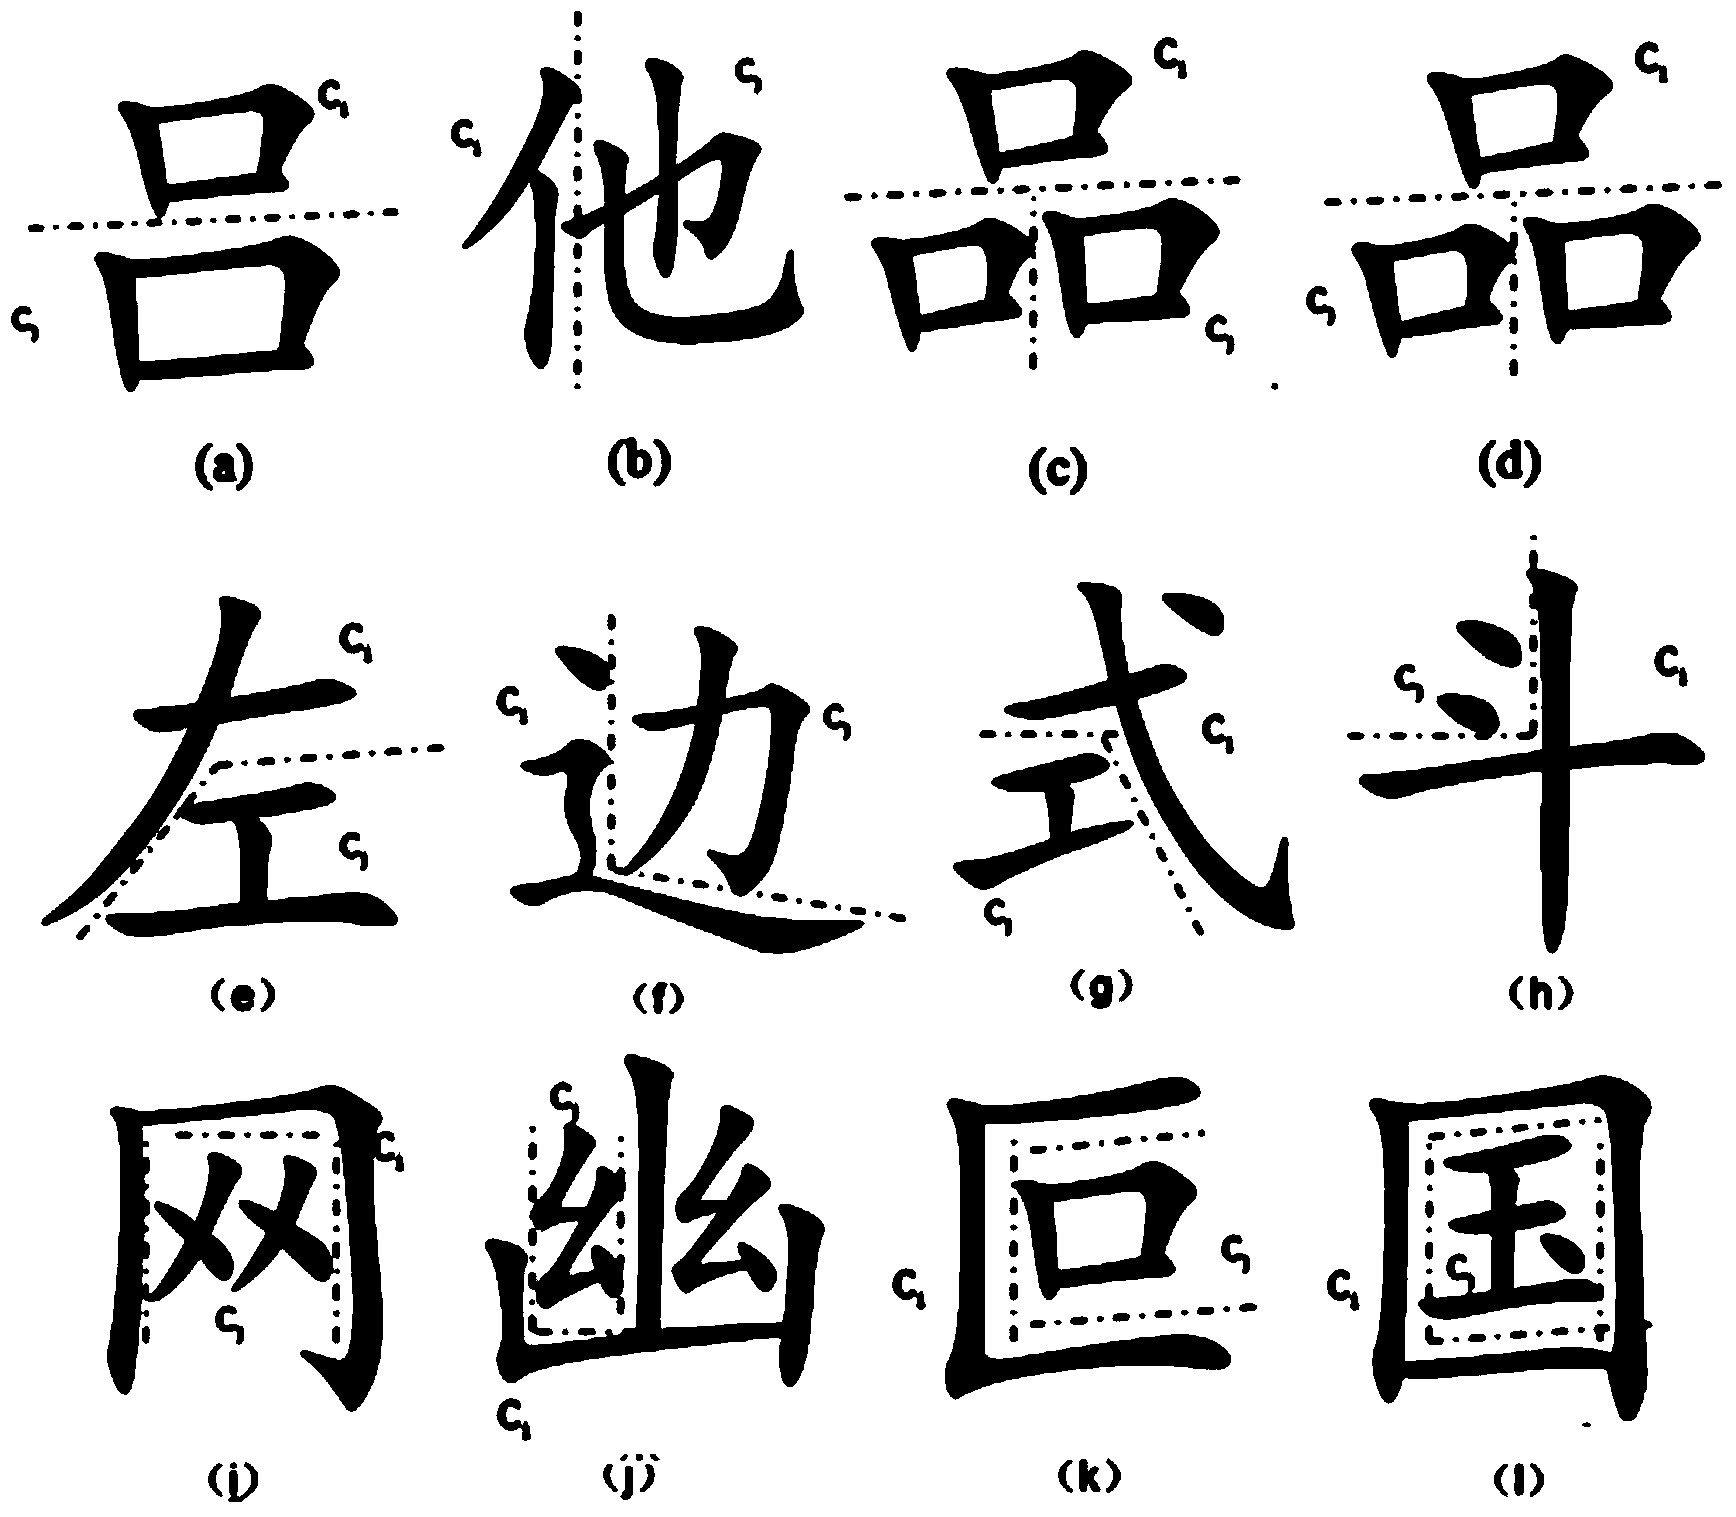 Method for judging correctness of position relation of strokes of handwritten Chinese character based on template matching